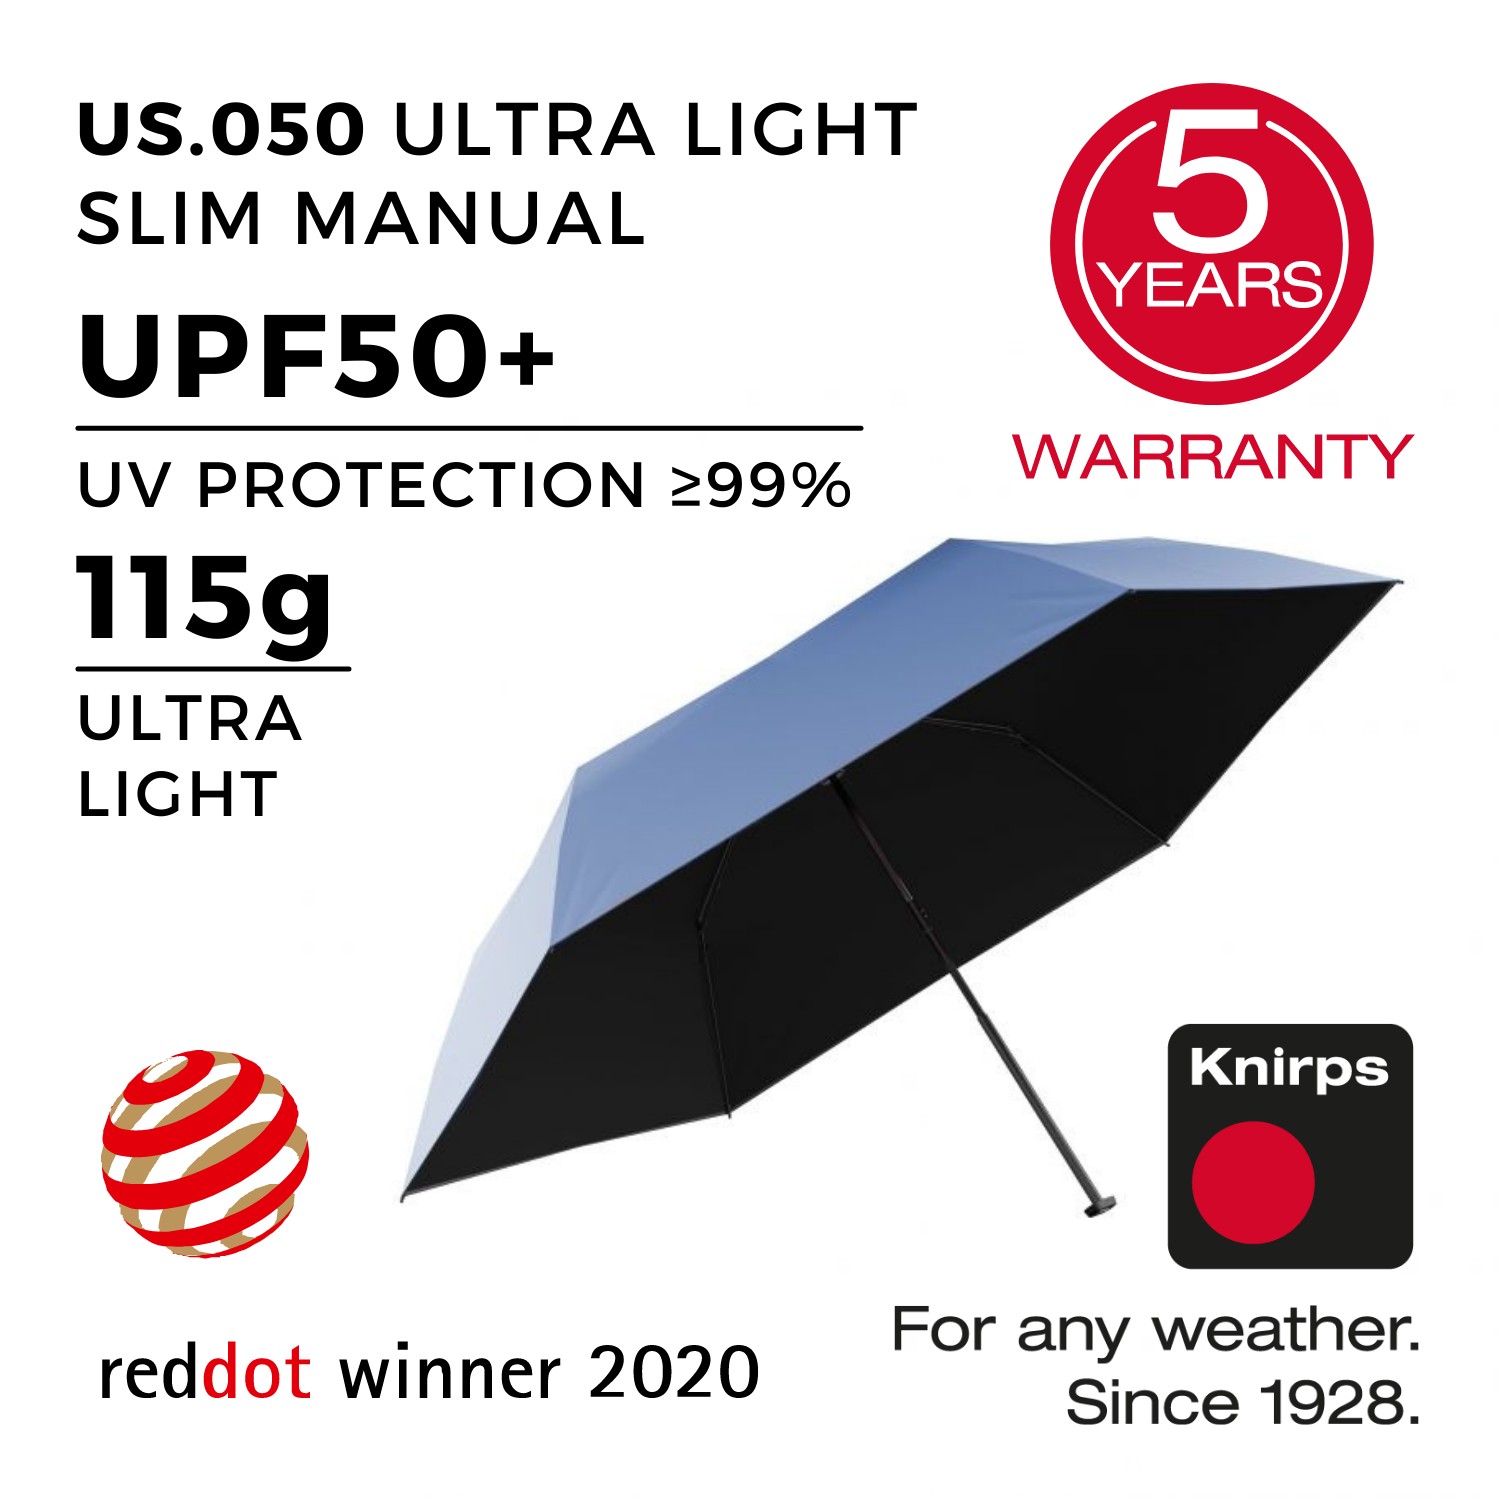 Buy Knirps Us.050 Ultra Light Slim Manual UV Protection Umbrella - Blue  with HeatShield Coating in Singapore & Malaysia - The Wallet Shop